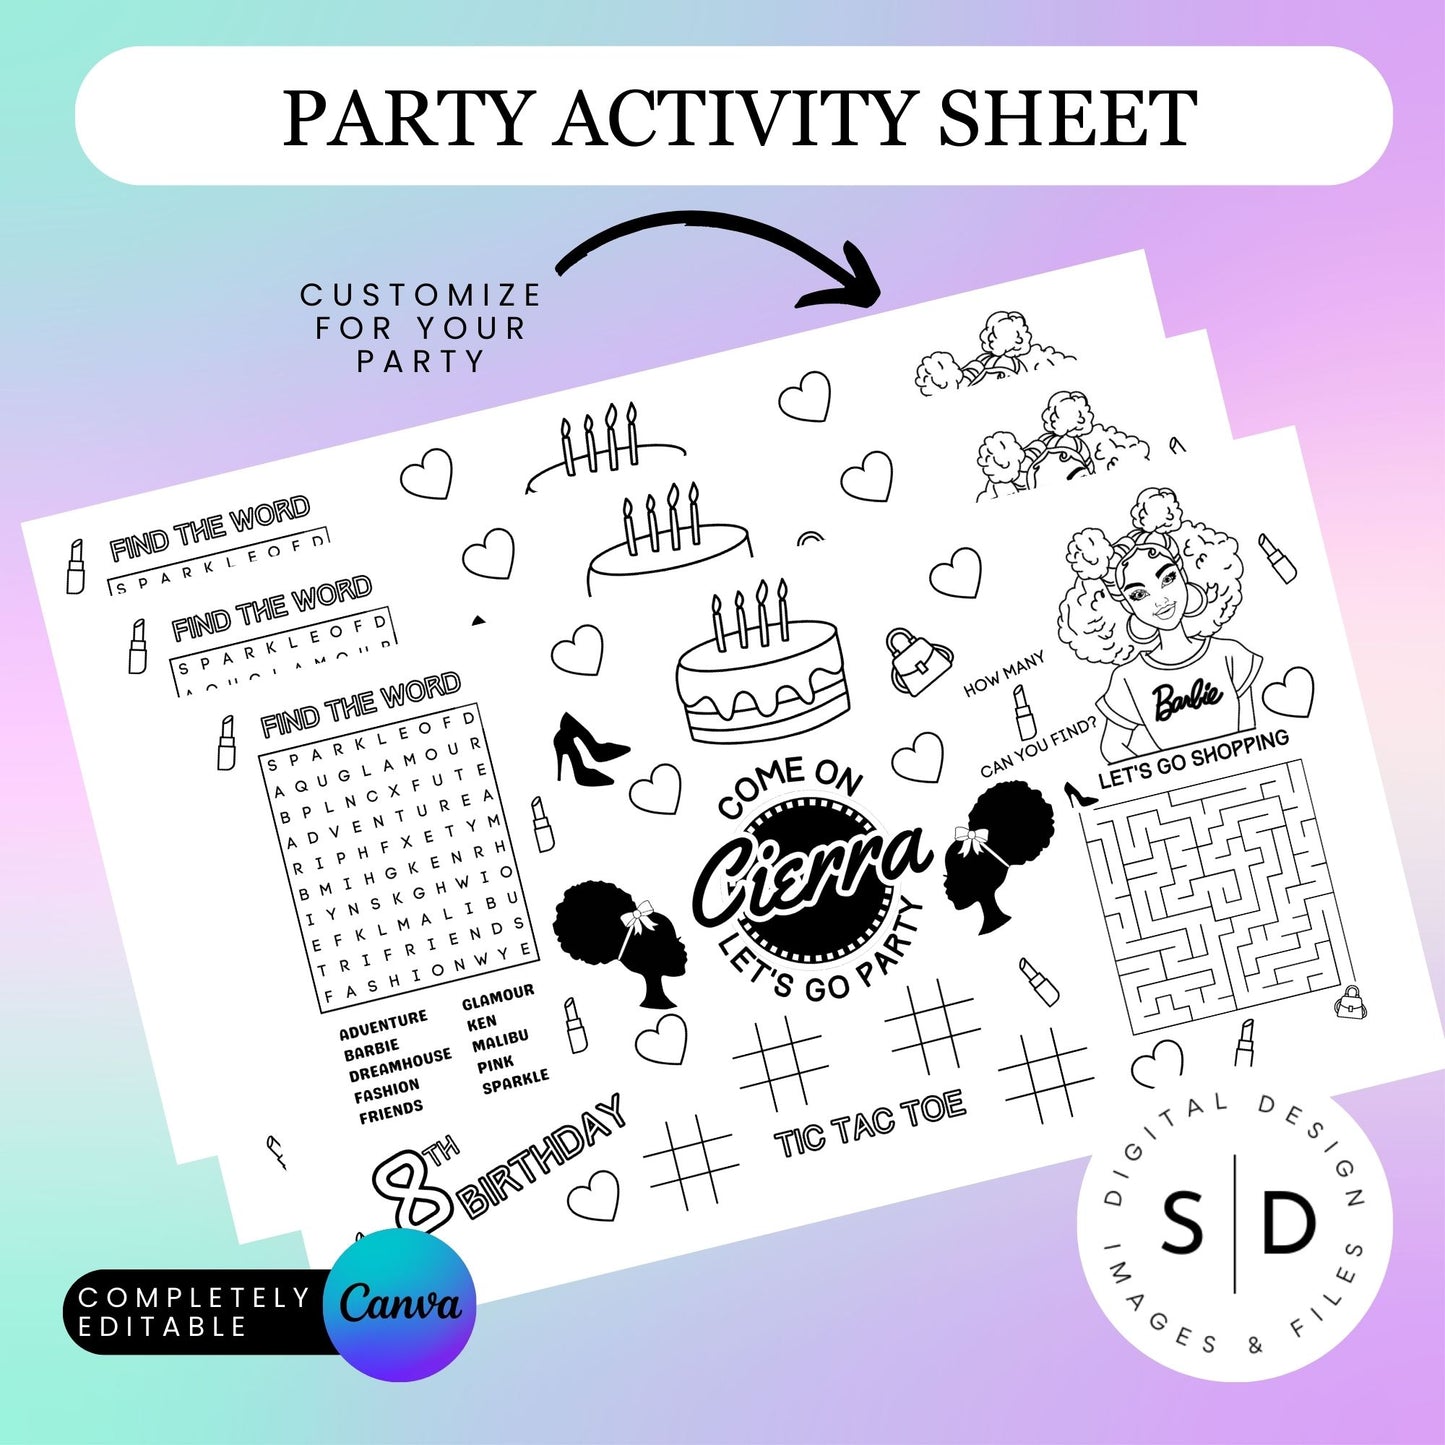 Afro Puff Fashion Doll Birthday Party Activity Sheet